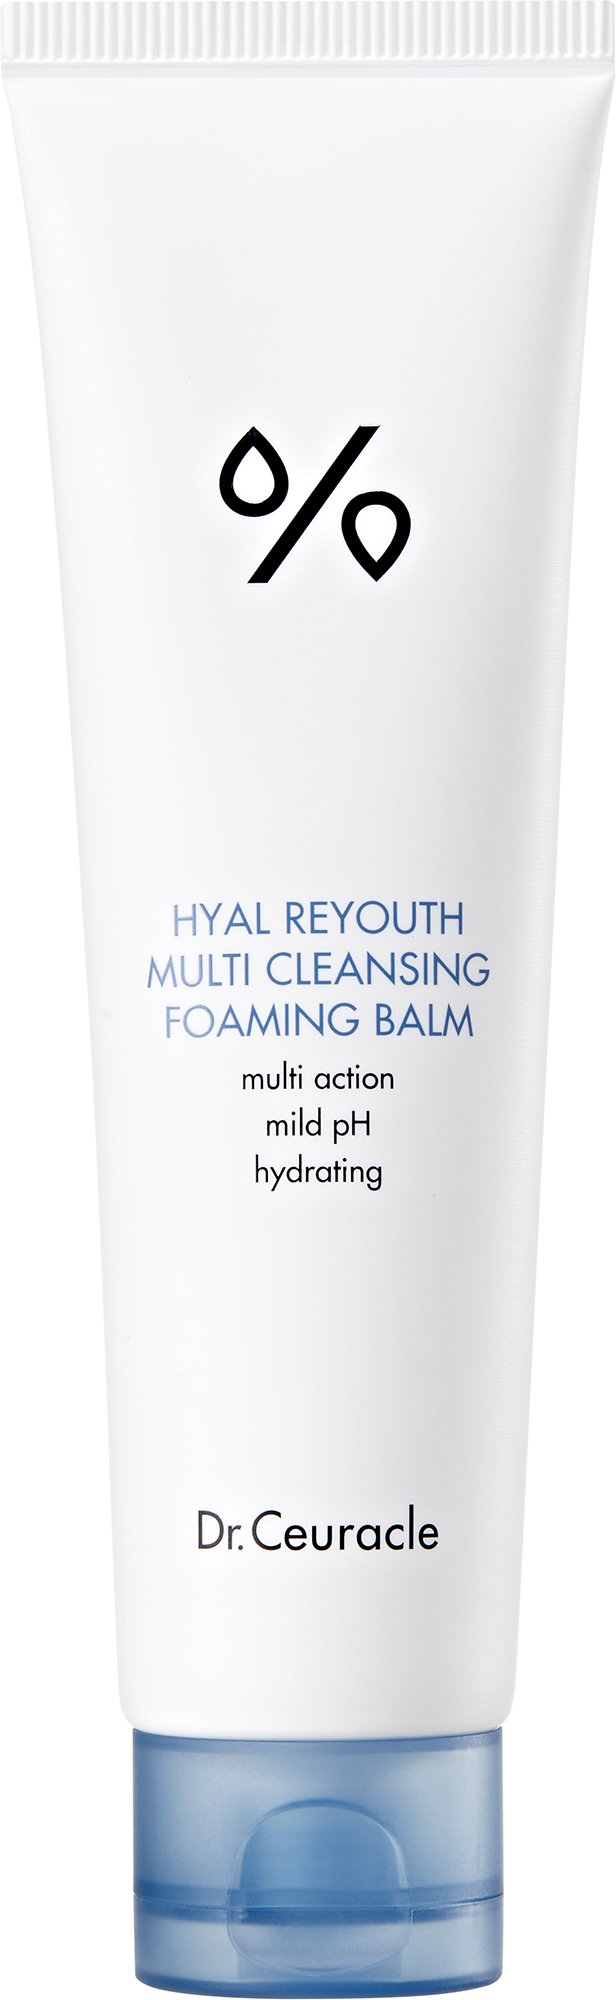 Dr Ceuracle Hyal Reyouth Cleansing Foaming Balm 100ml